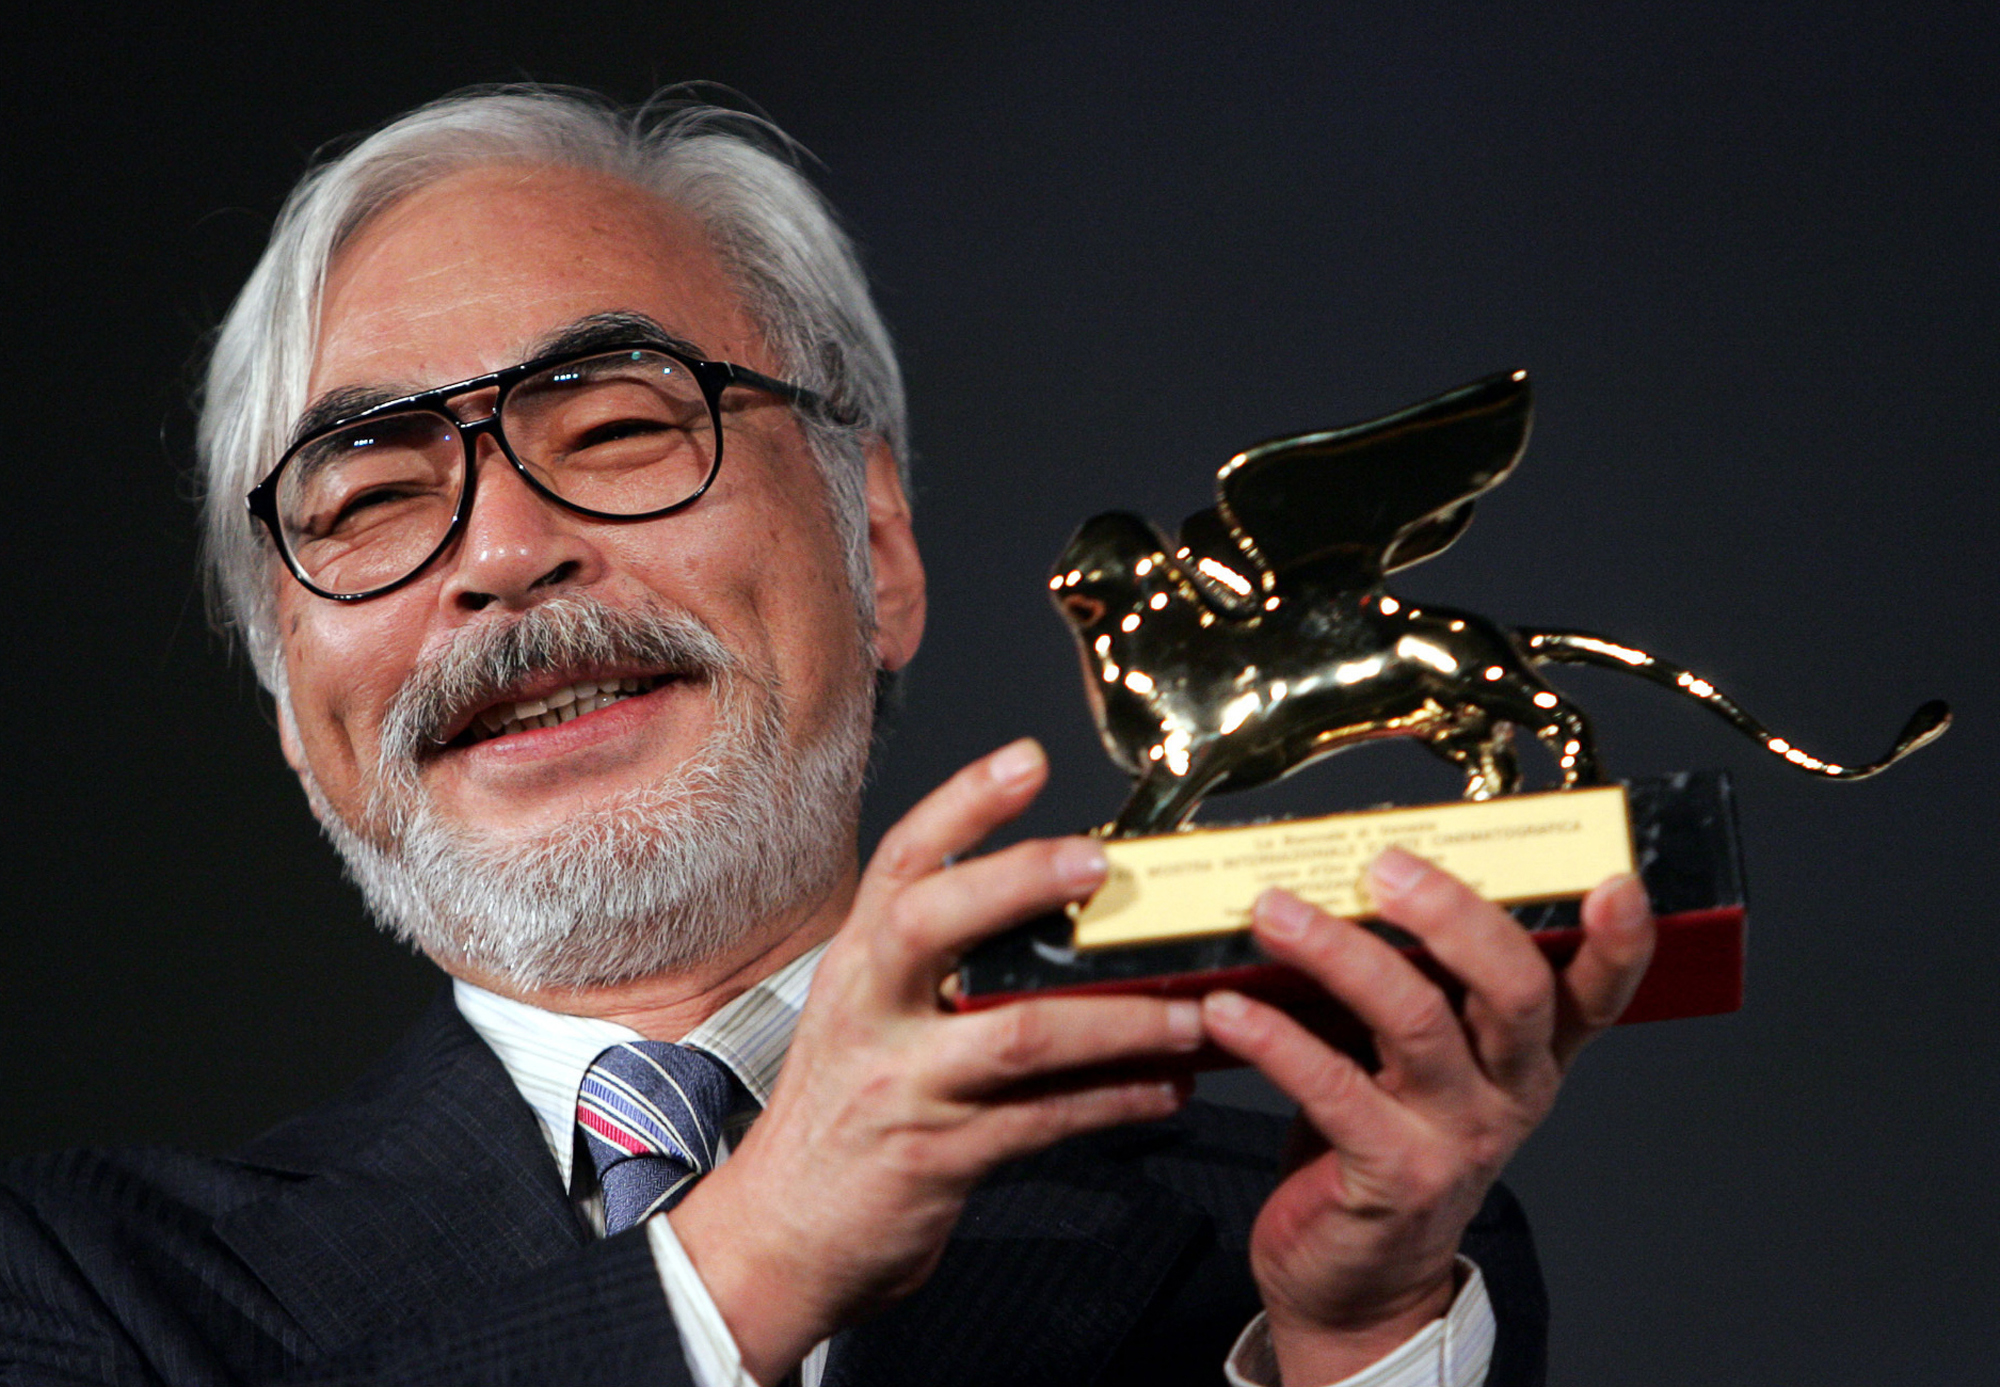 Hayao Miyazaki Has Turned Into Anime James Cameron With The Delays On His  Last Film | Cracked.com